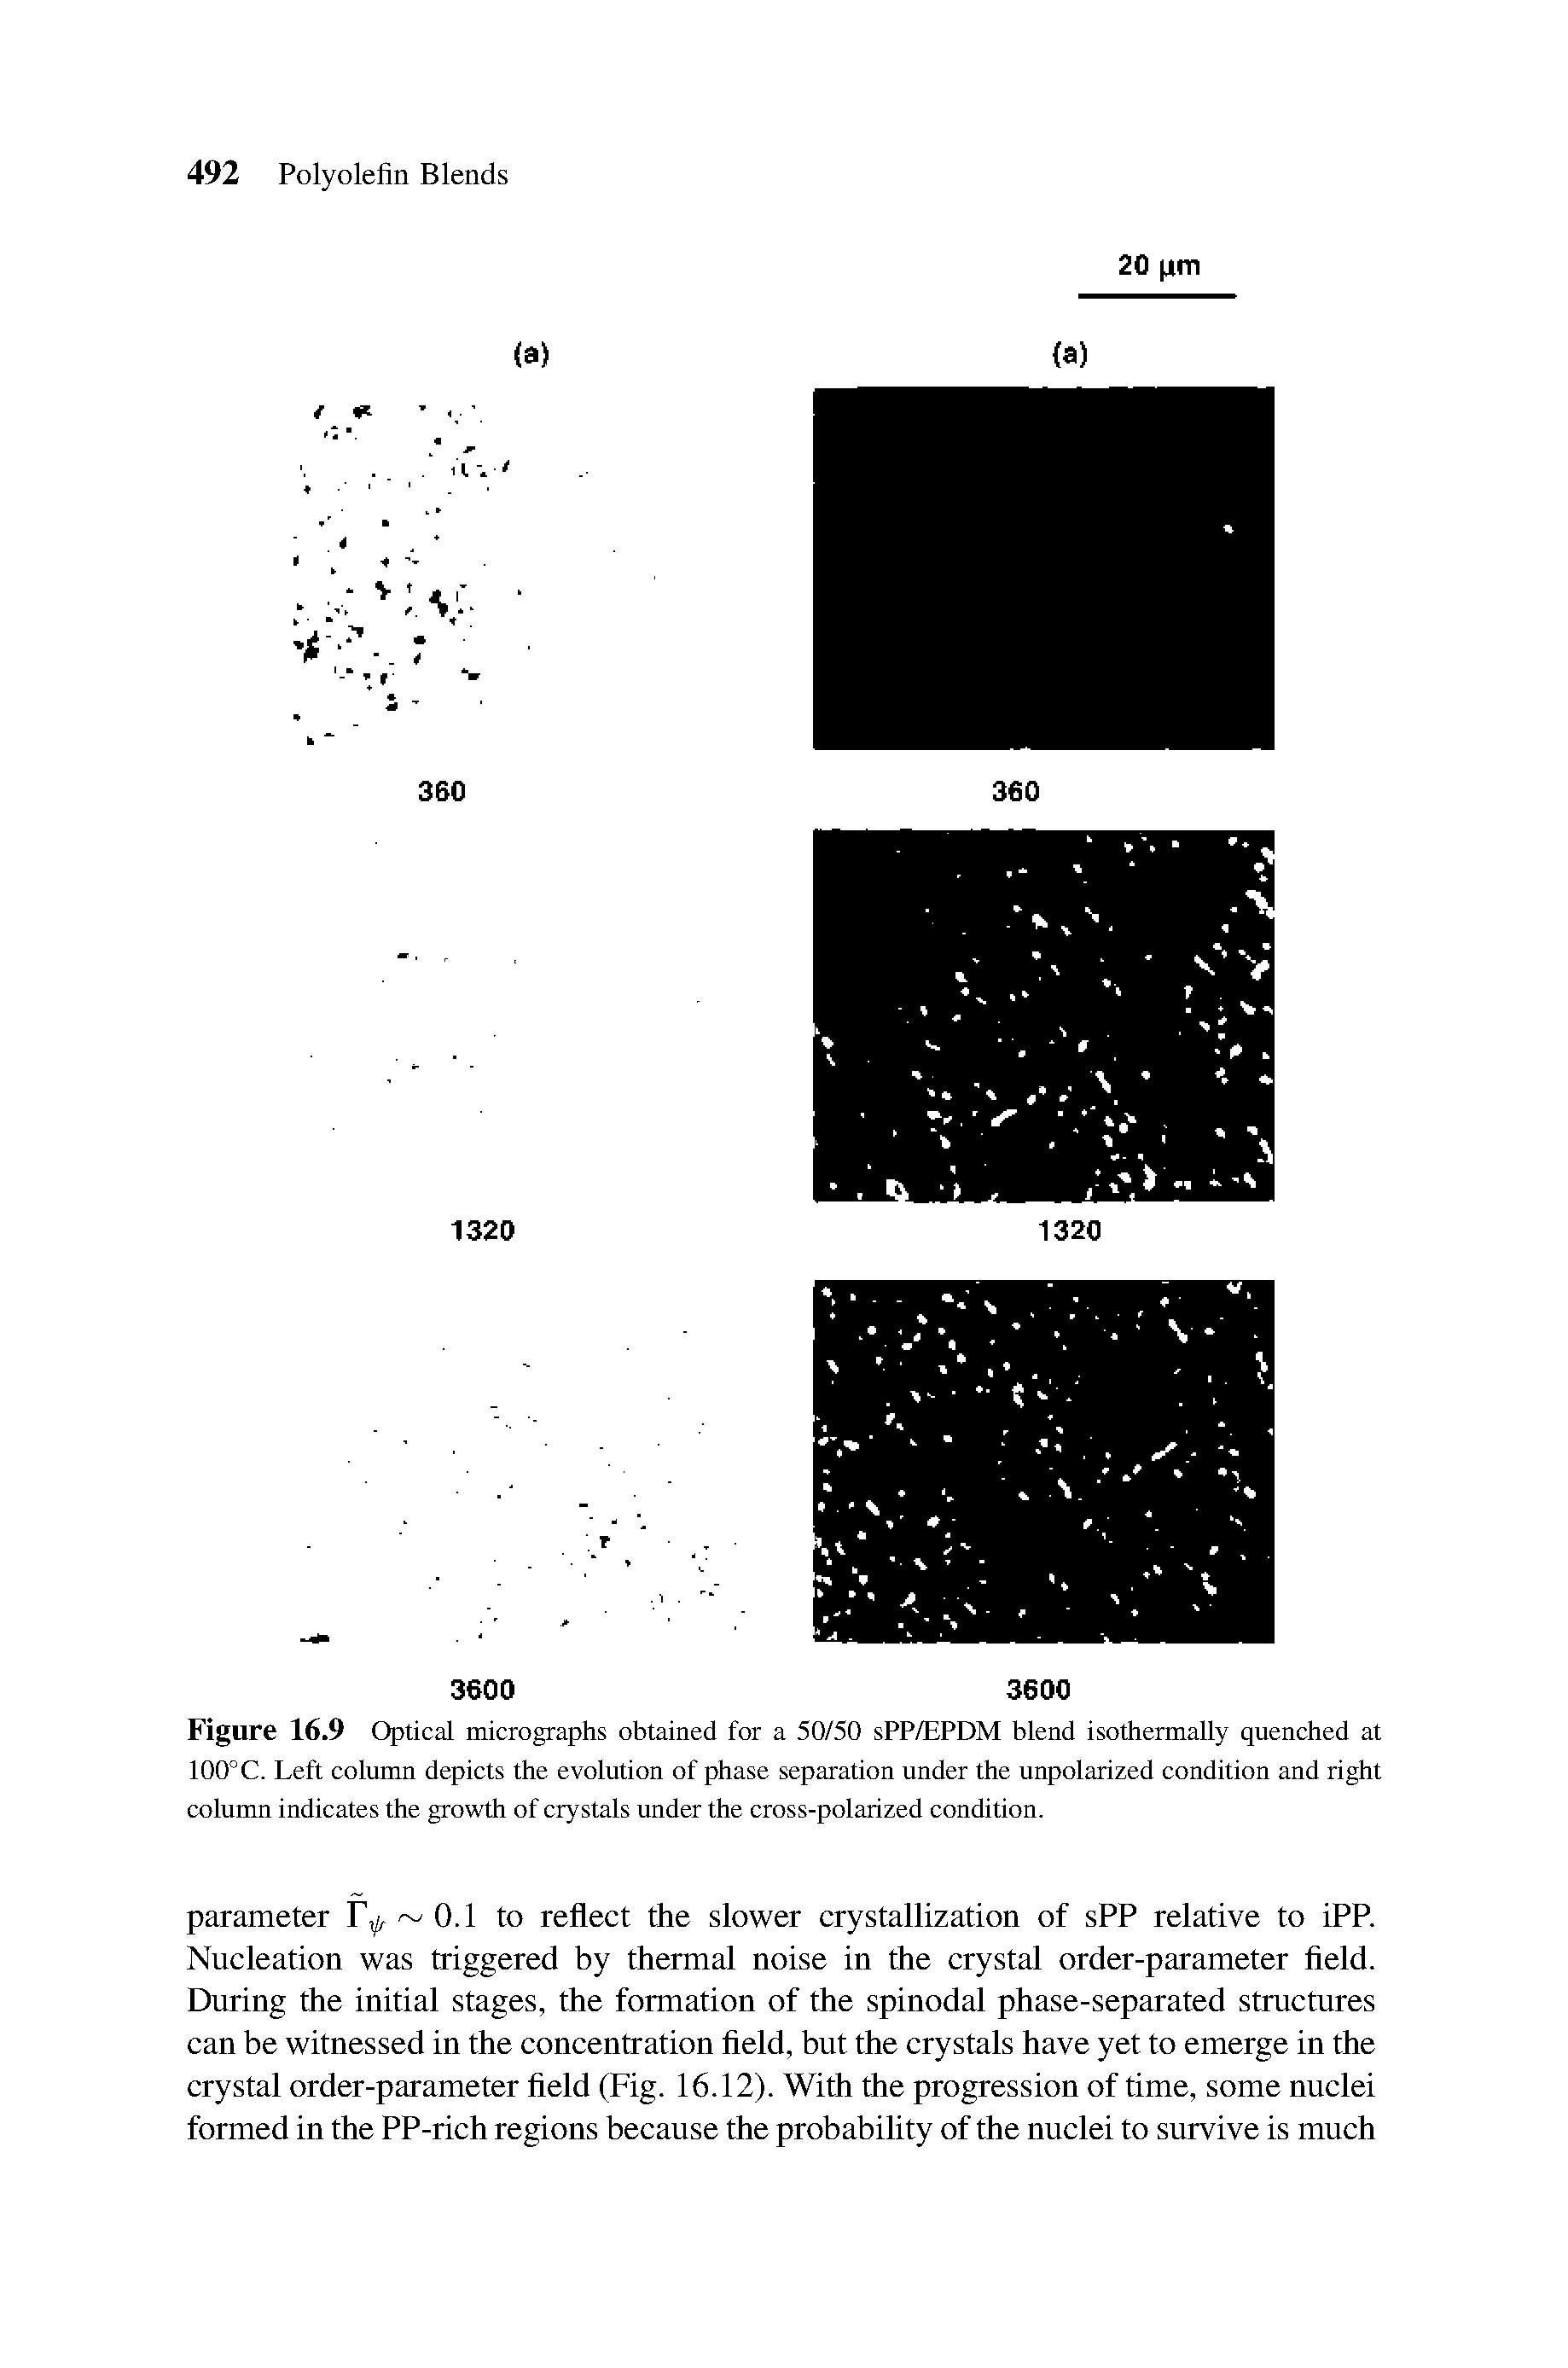 Figure 16.9 Optical micrographs obtained for a 50/50 sPP/EPDM blend isothermally quenched at 100°C. Left column depicts the evolution of phase separation under the unpolarized condition and right column indicates the growth of crystals under the cross-polarized condition.